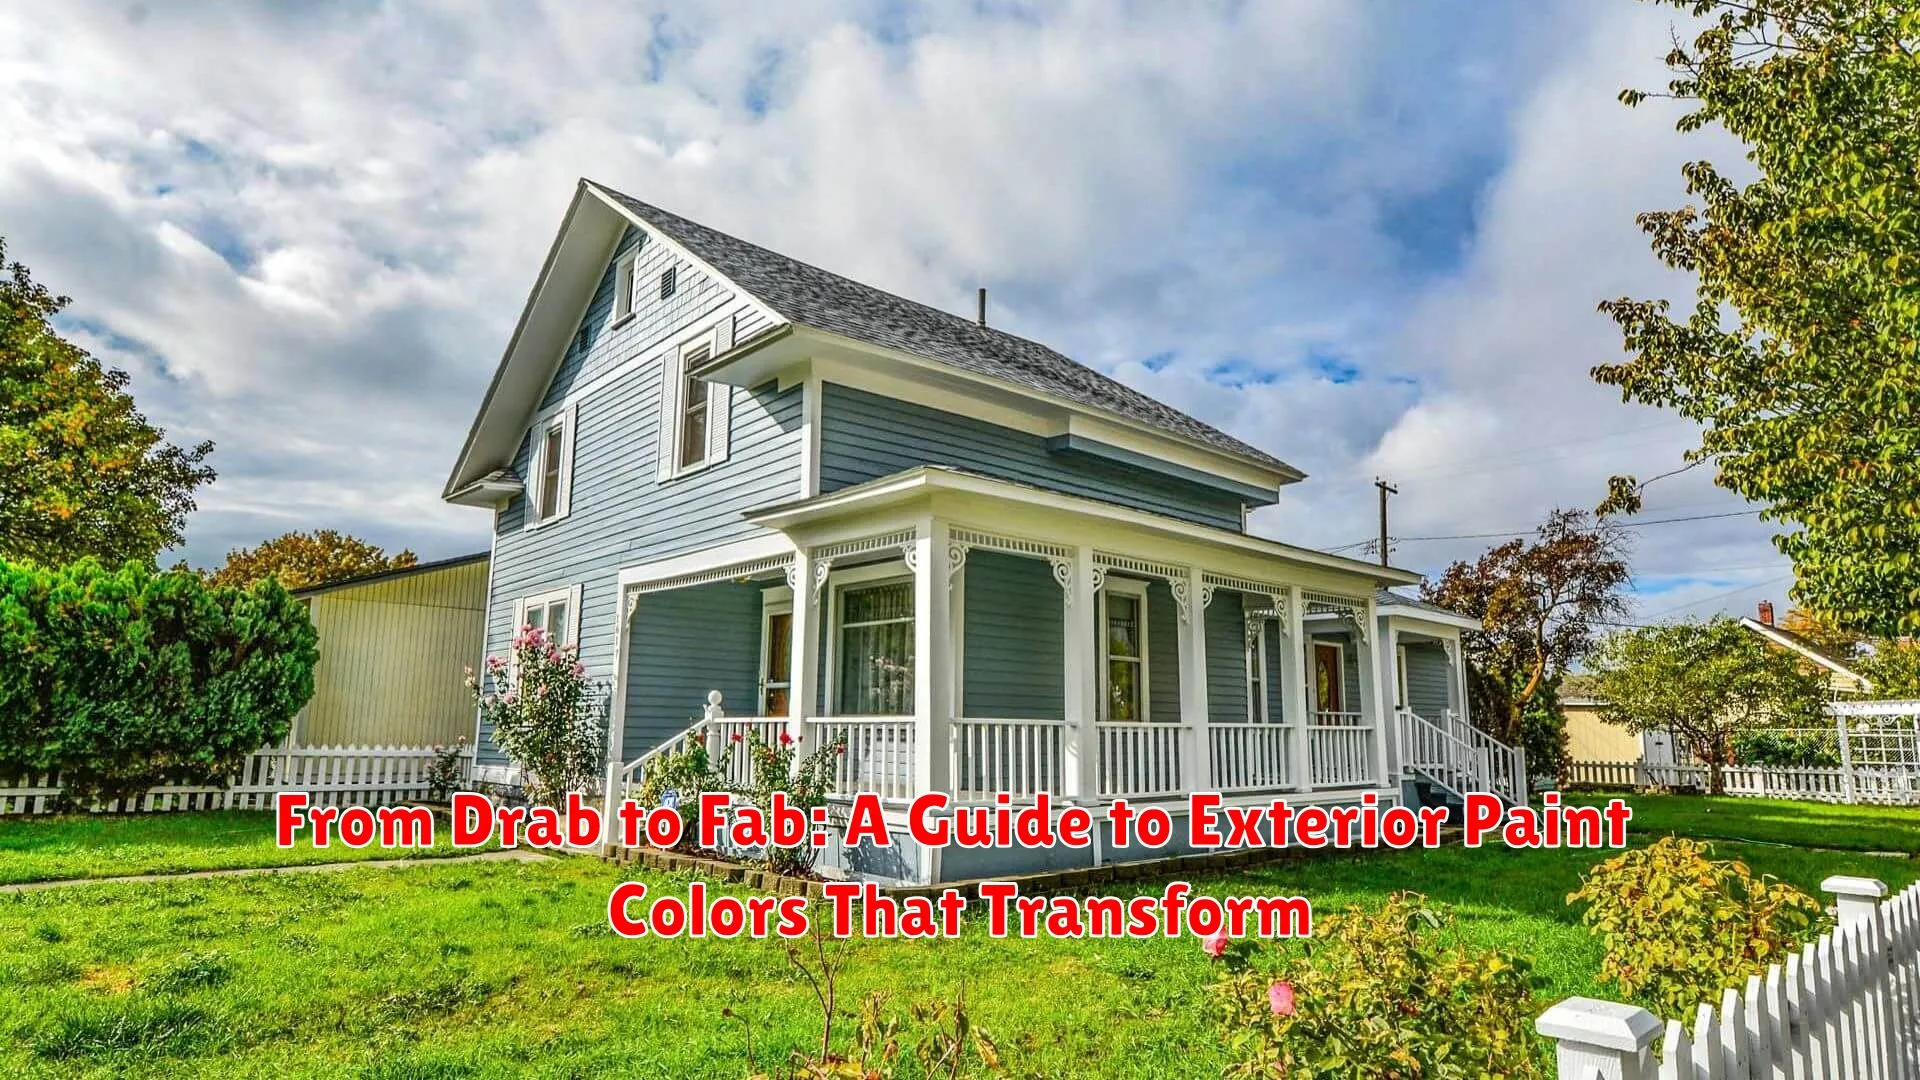 From Drab to Fab: A Guide to Exterior Paint Colors That Transform